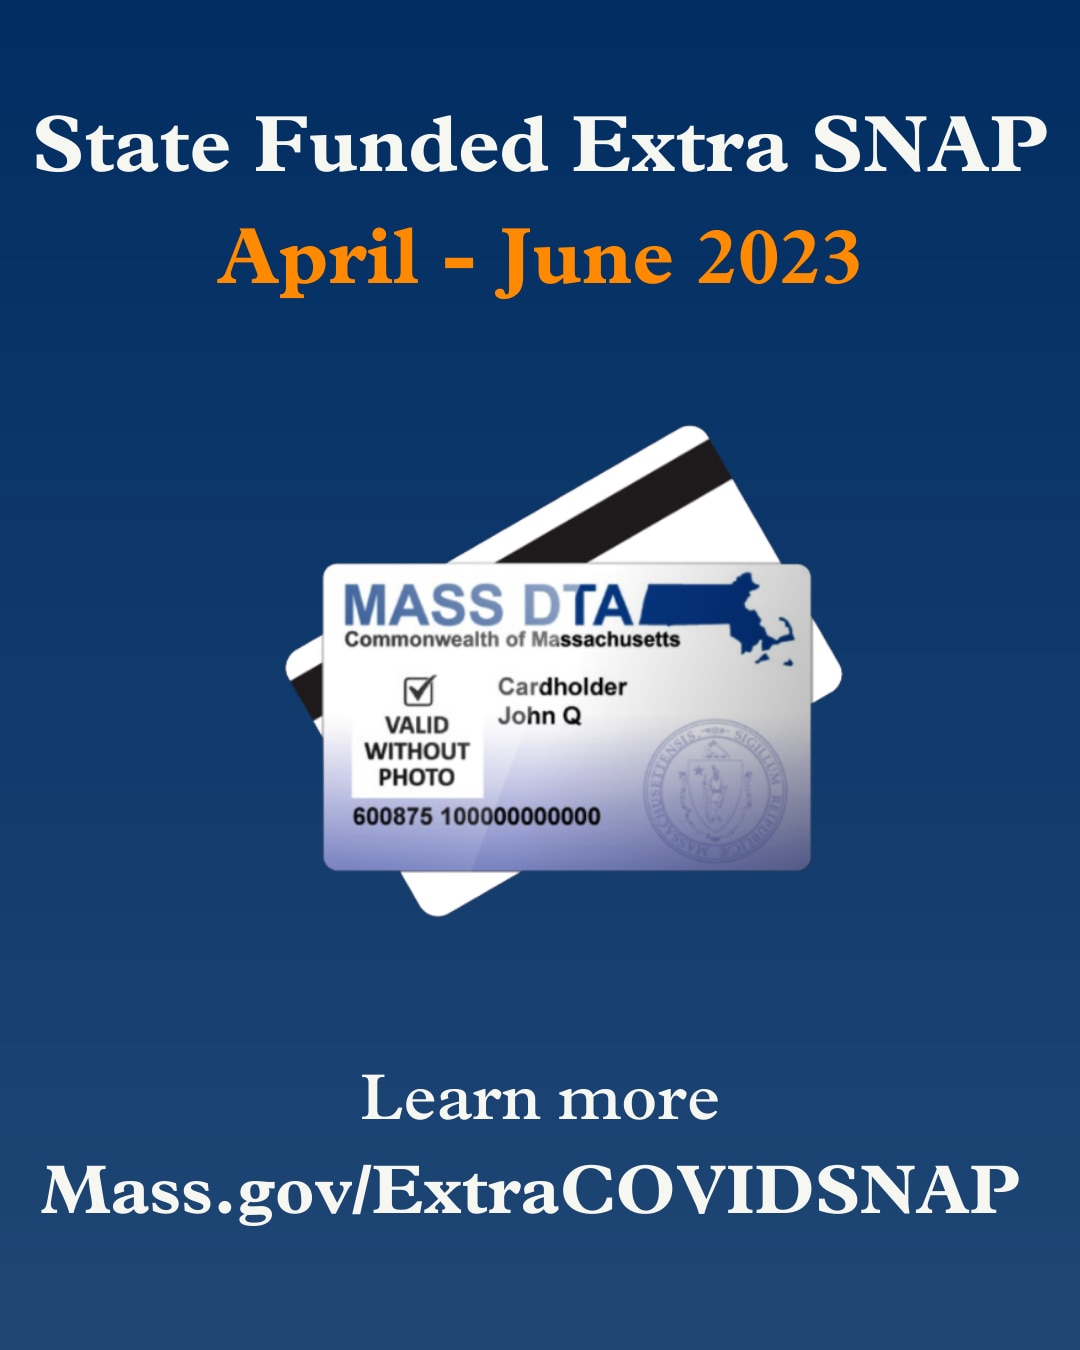 Graphic of an ebt card saying the state-funded extra SNAP is available April - June 2023 and includes the link to Mass.gov/ExtraCOVIDSNAP